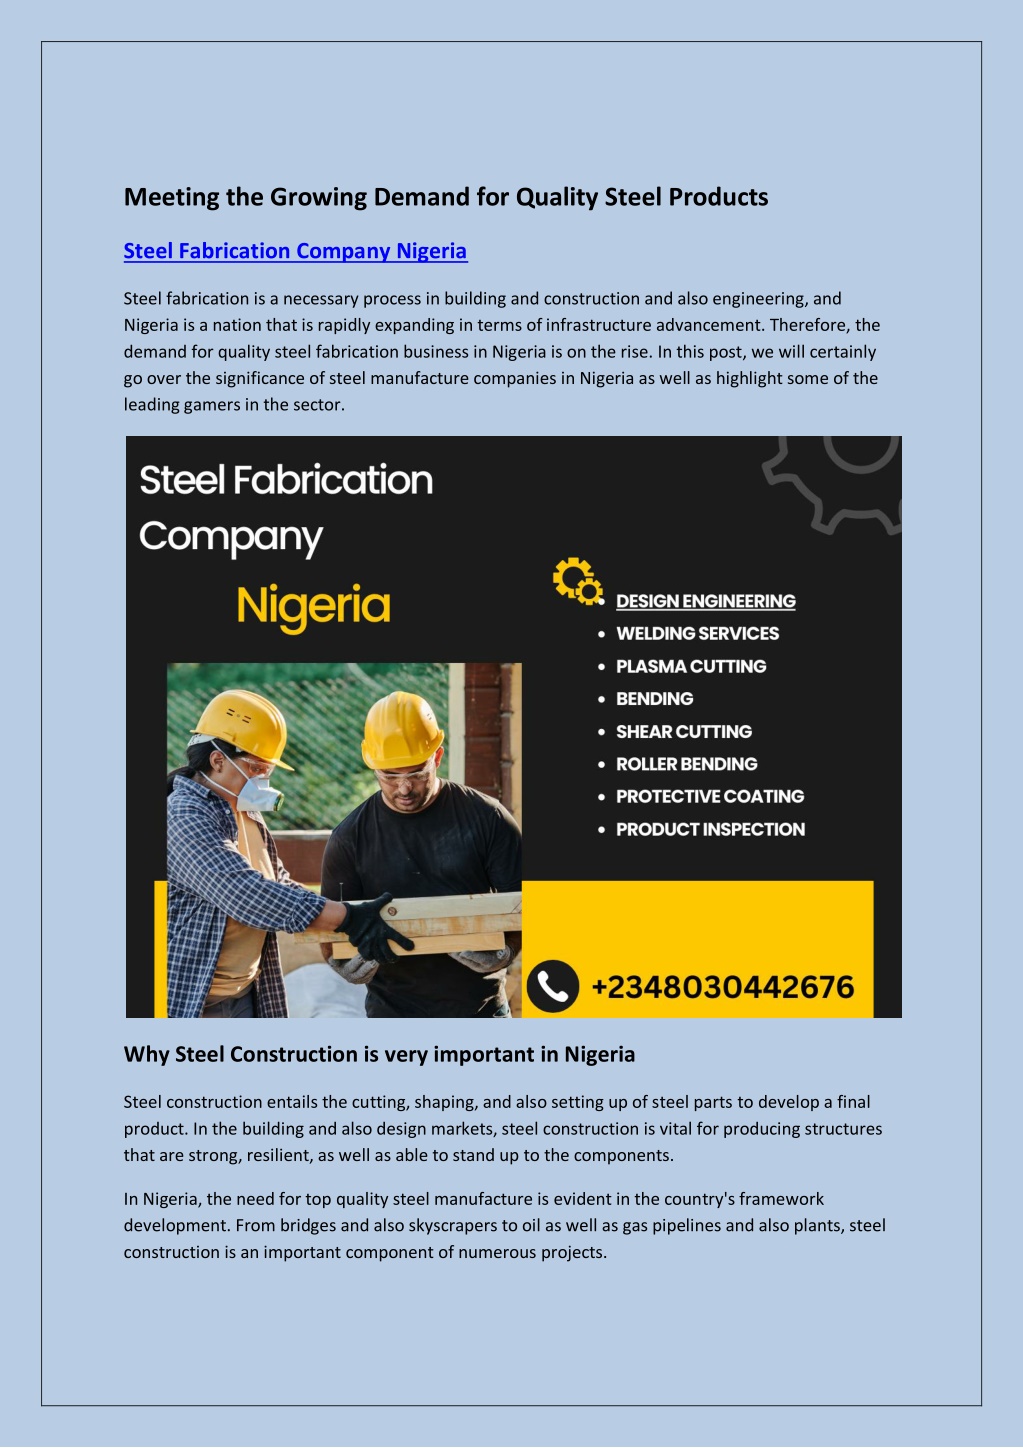 Best Steel Quality to manufacture Various Construction Materials -PrimeGold